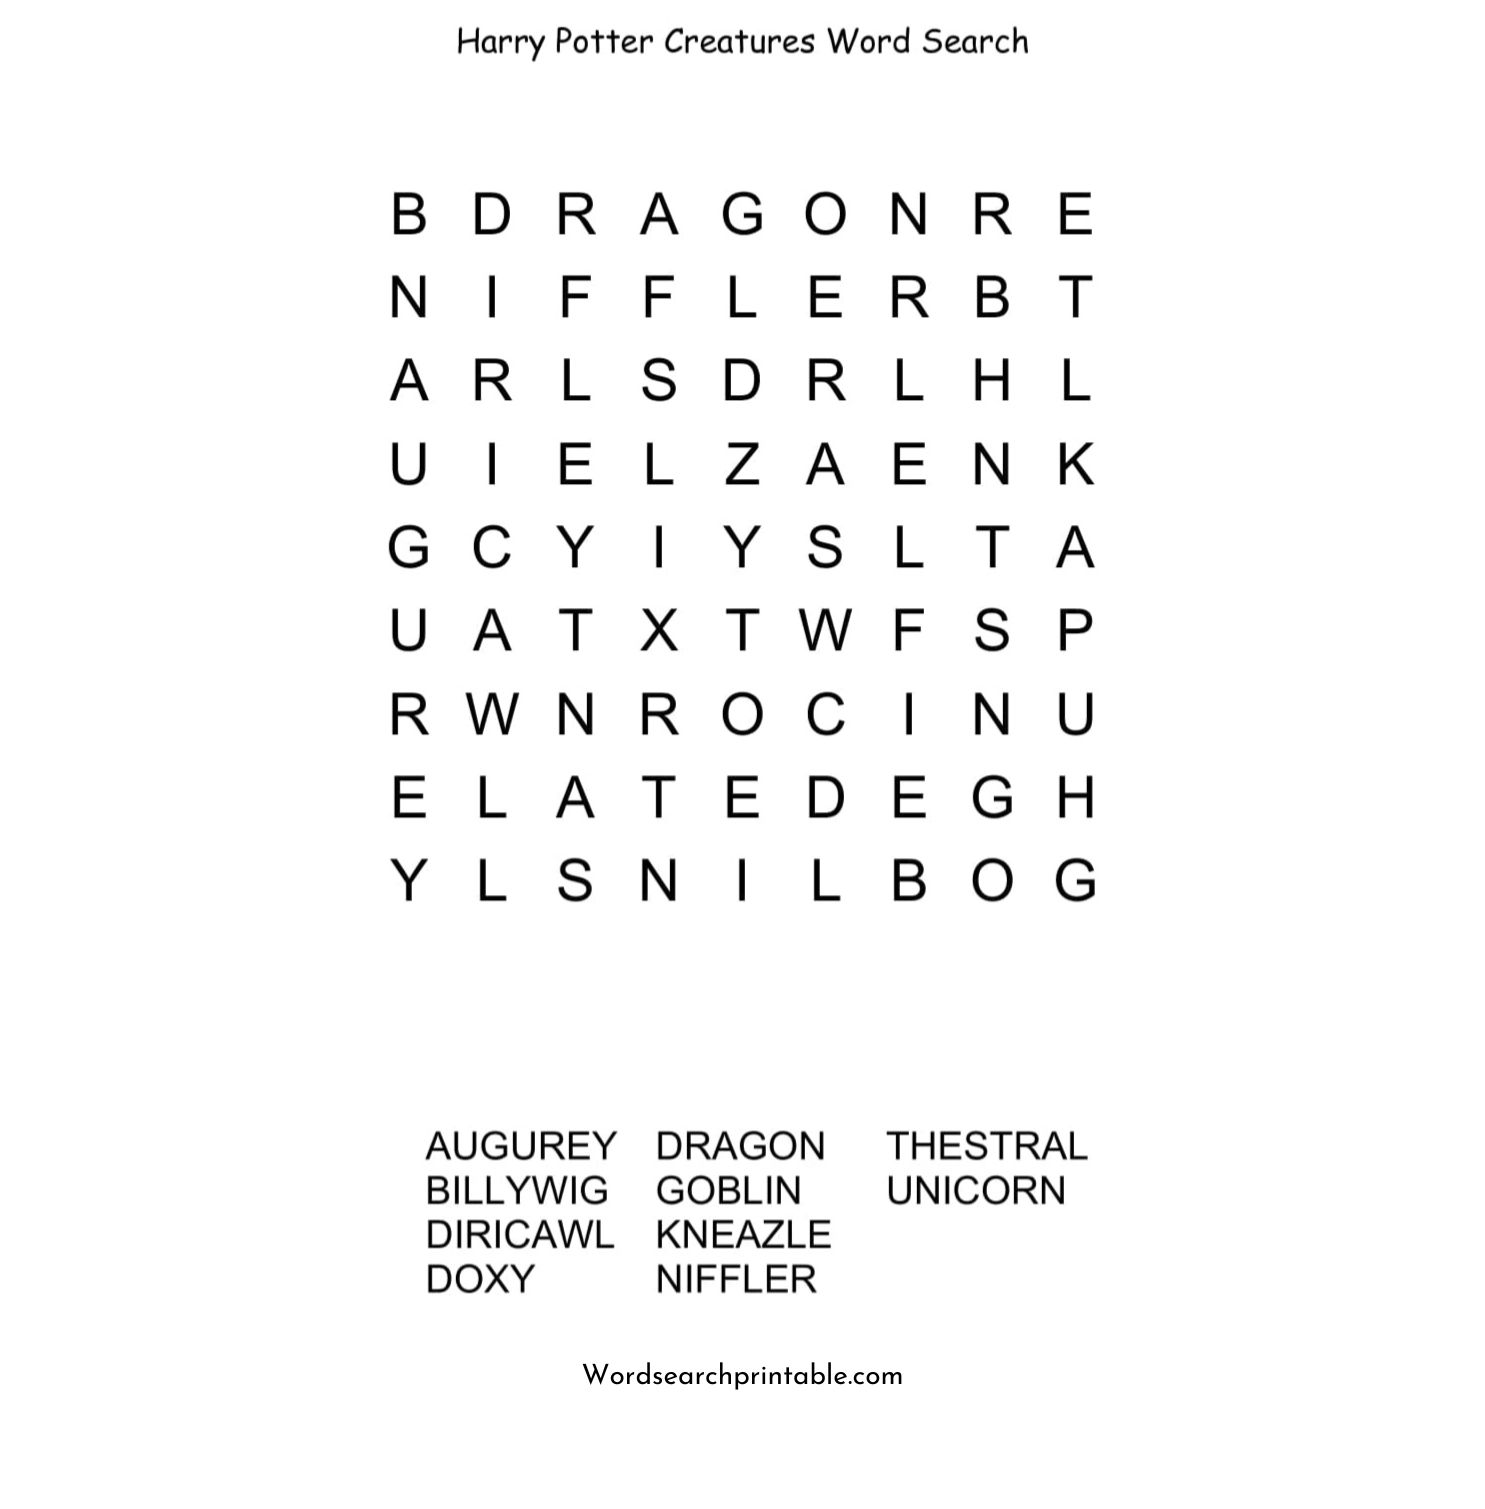 harry potter creatures word search puzzle